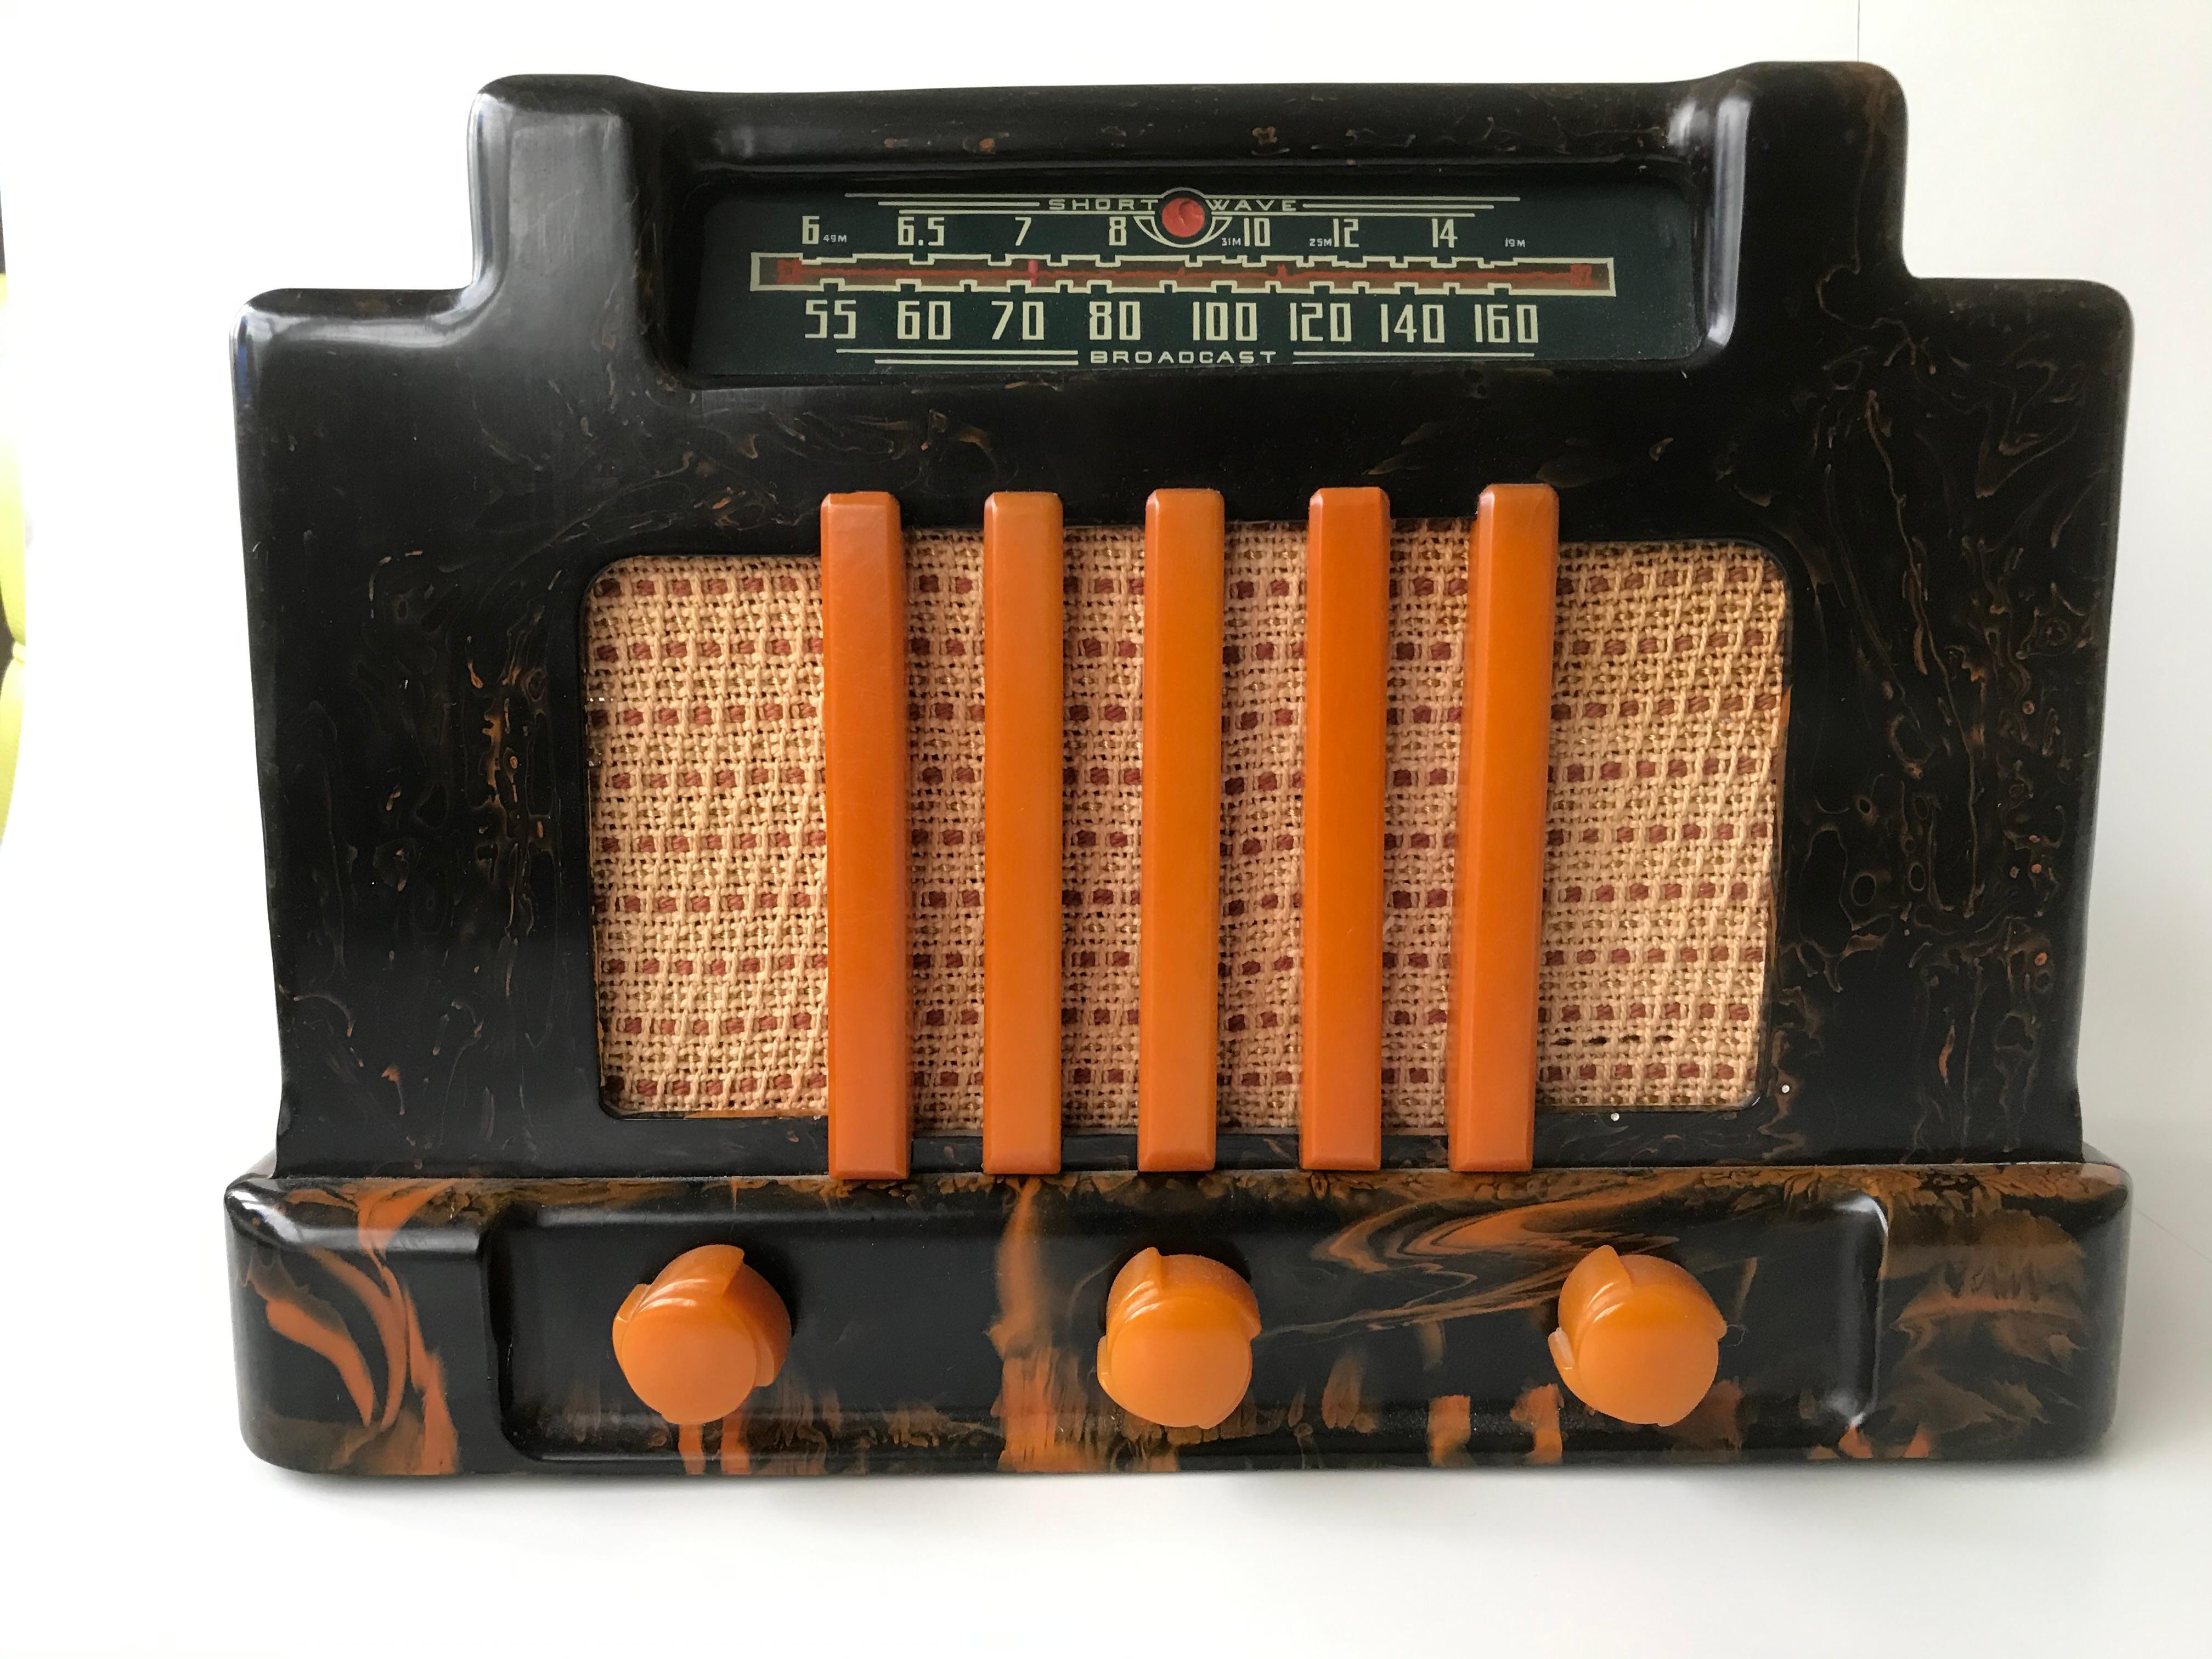 In 1939, Toronto-based Addison Industries Ltd., a Canadian company, was founded focussing on the production of commercial tube radios.  The Model 5 “Big Addison” series, featured here, resembling a courthouse or similar monumental building, was made